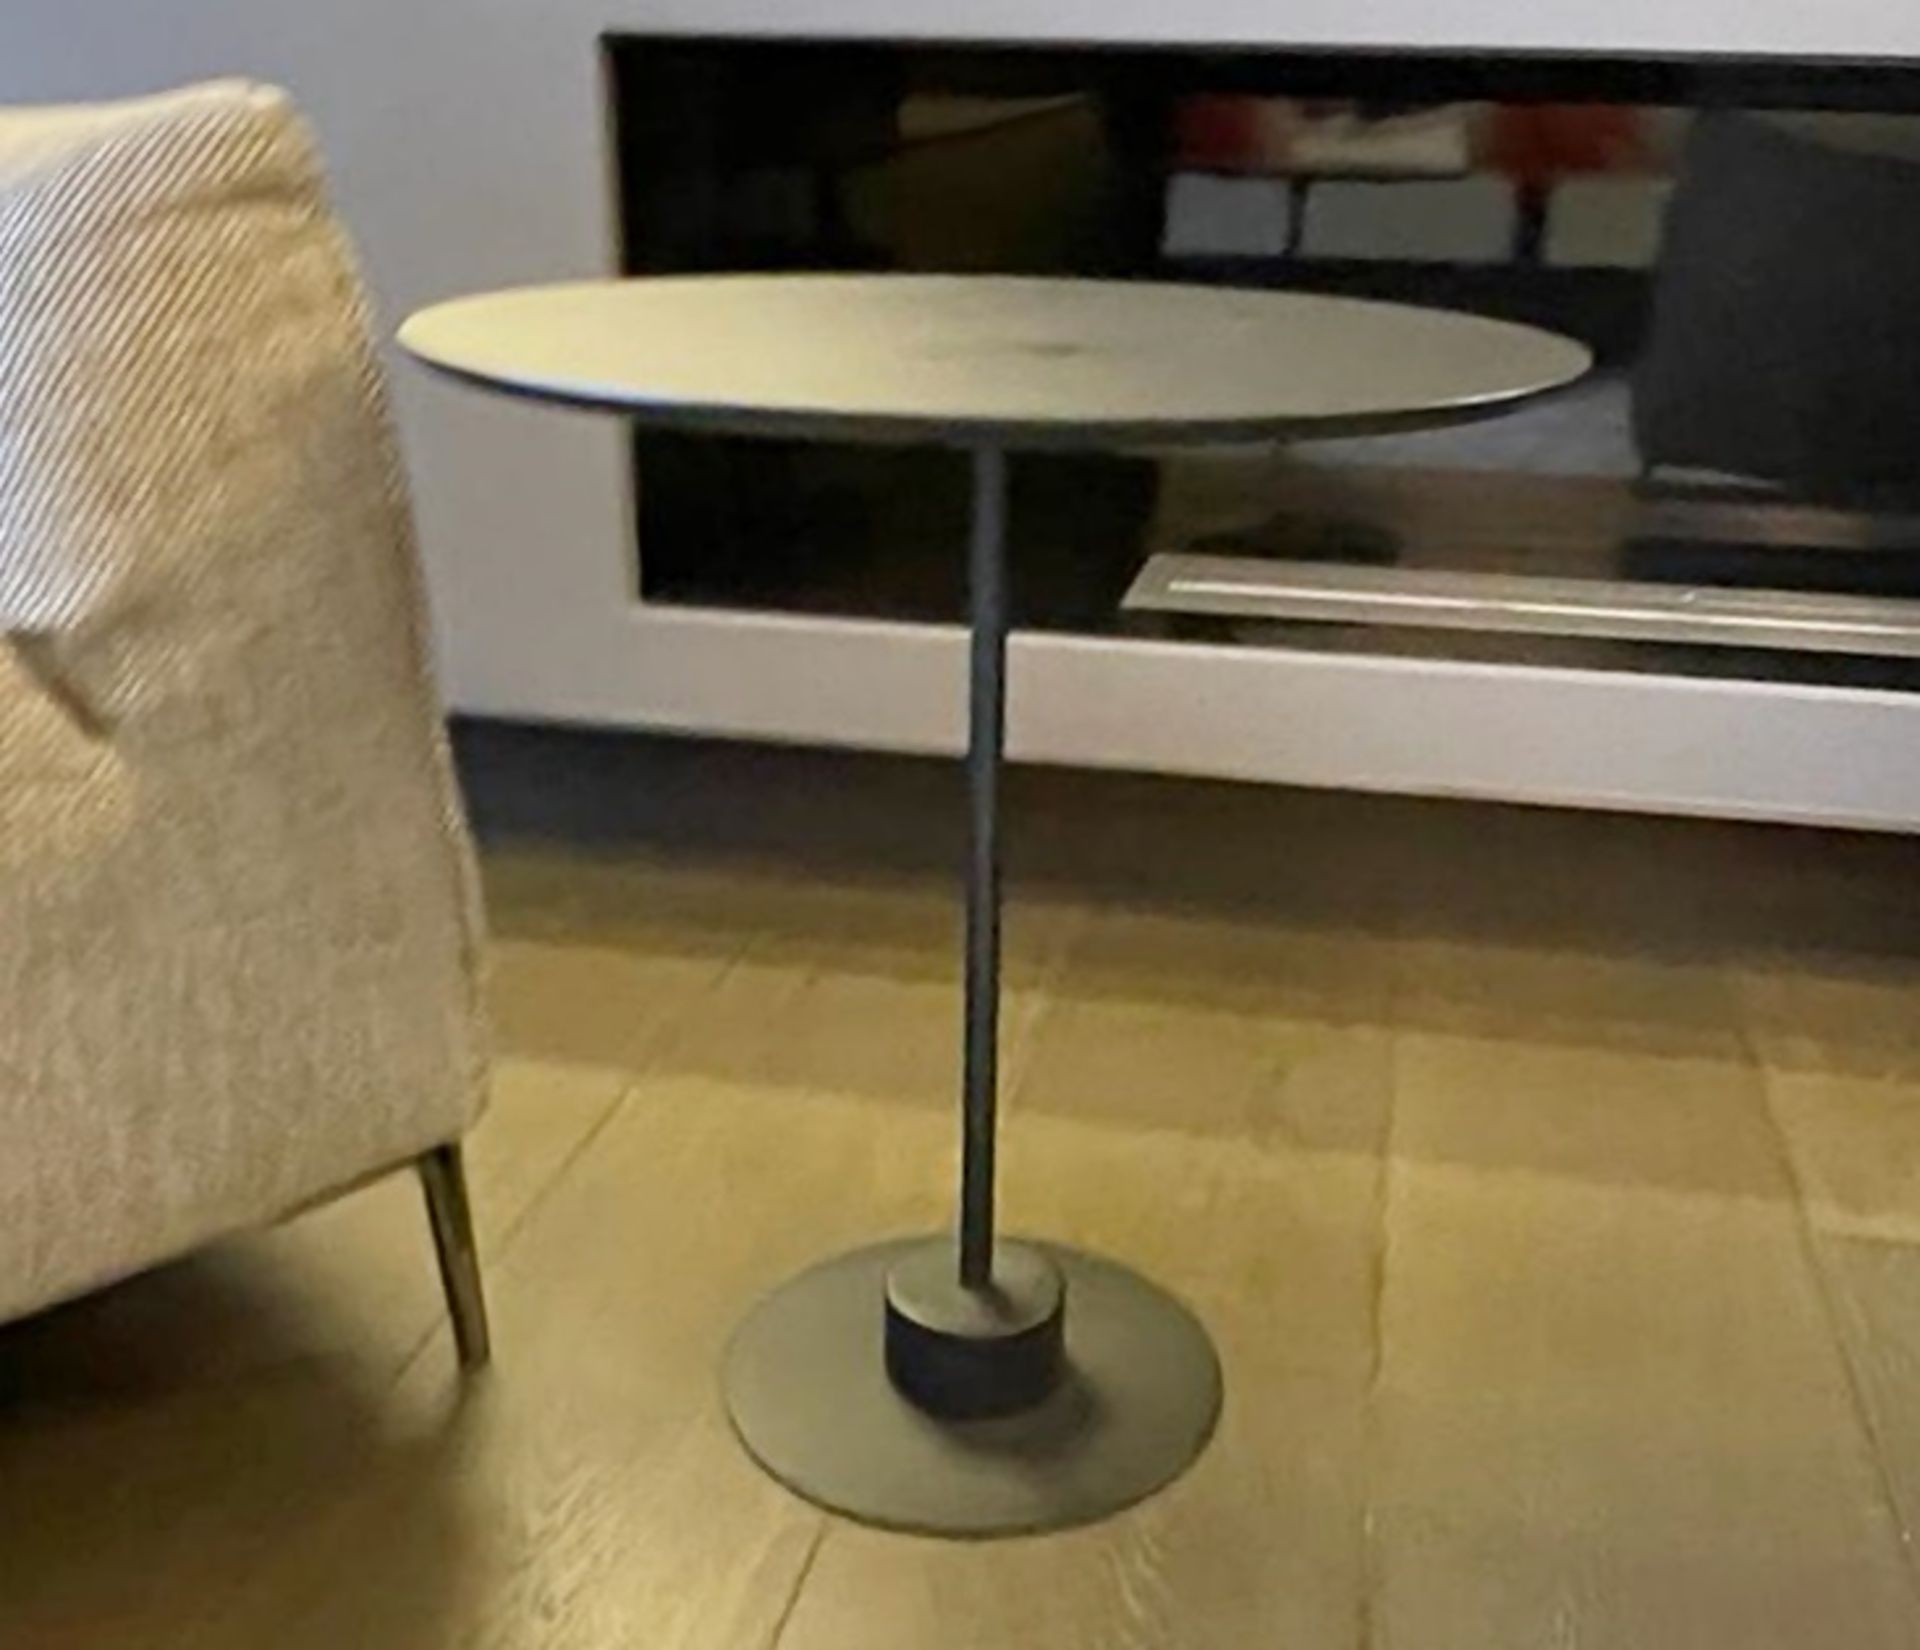 1 x Stylish Round Occasional Metal Table with a Bronzed Finish and Industrial Aesthetic - Image 2 of 2